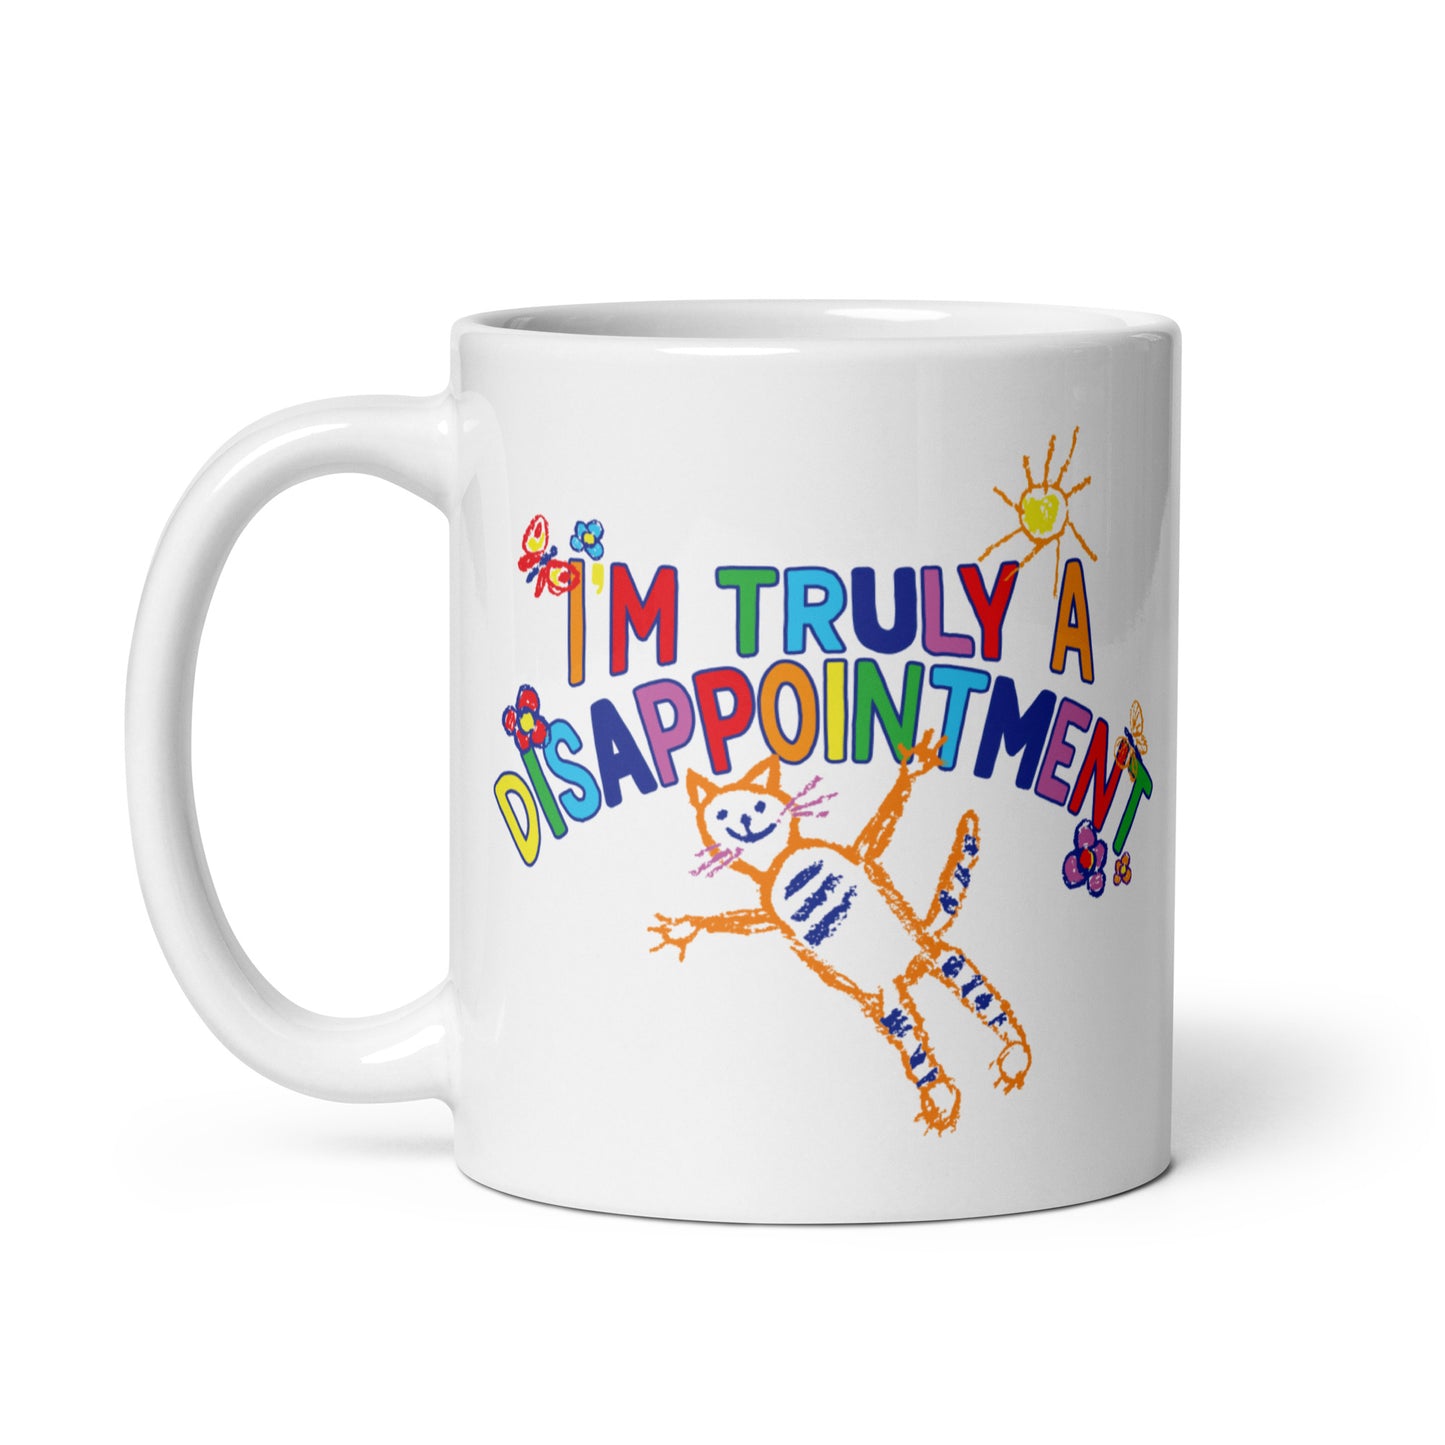 I'm Truly a Disappointment mug